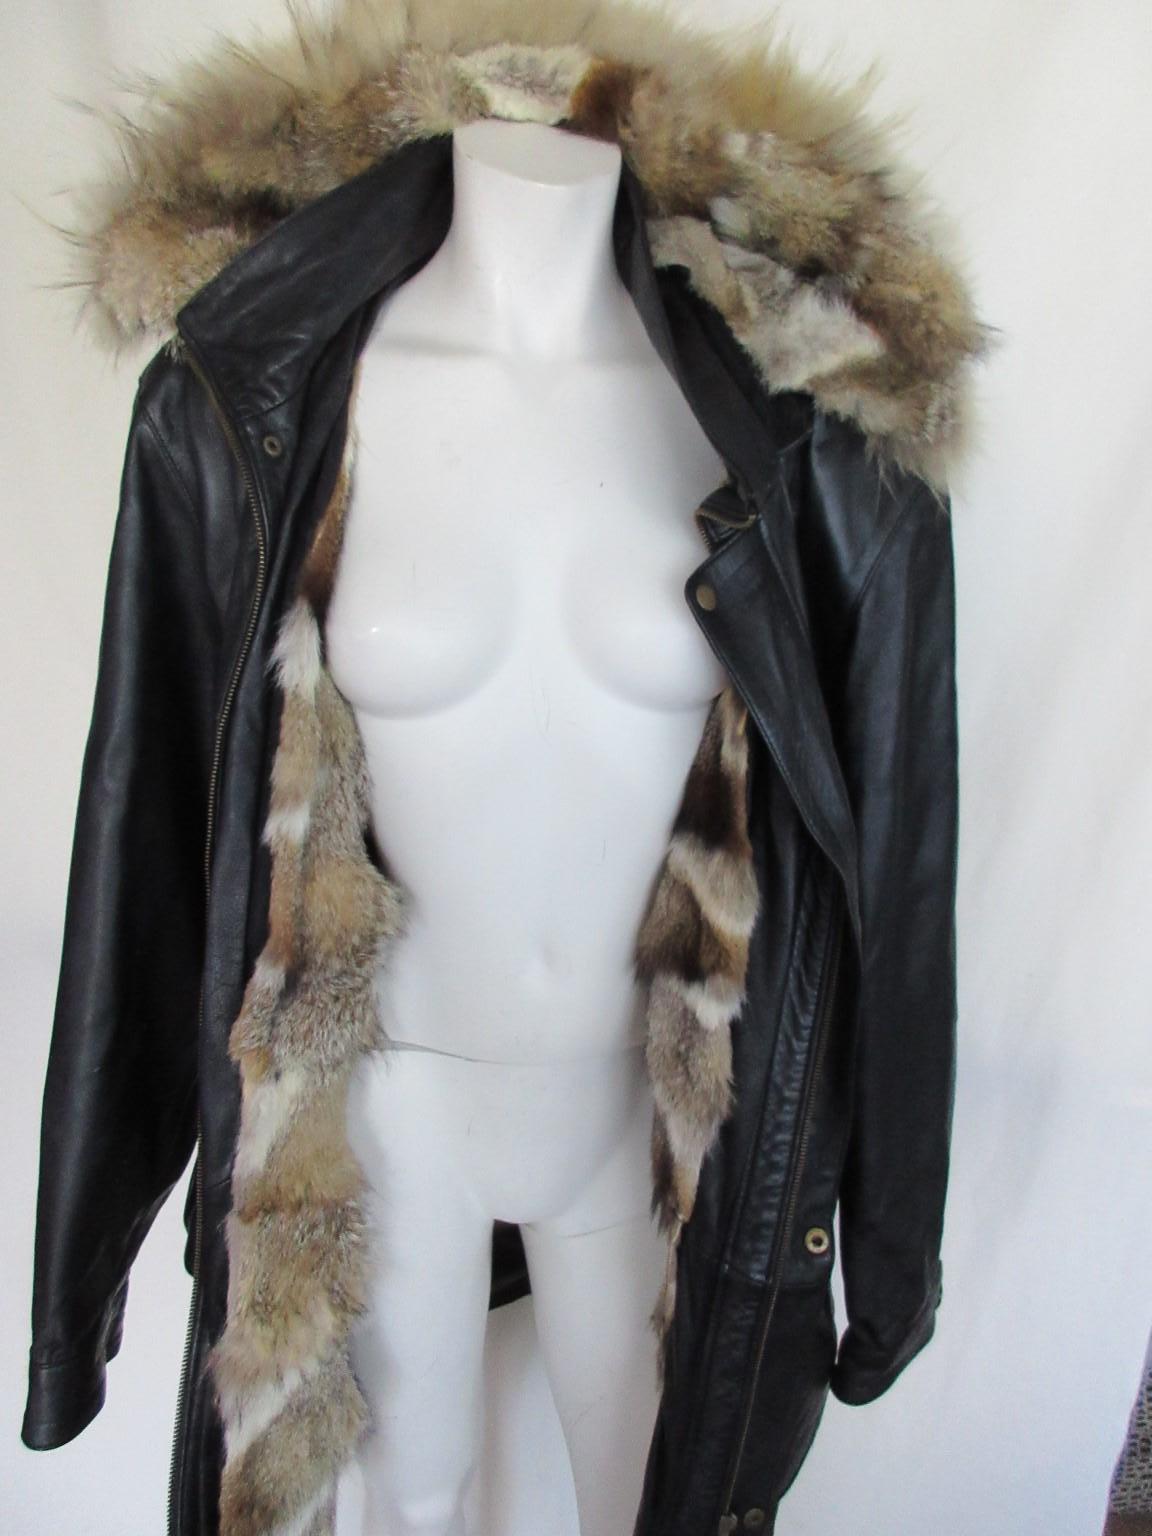 we offer more exclusive items, view our frontstore

Details:
Outside leather
hood with zipper
inside detachable fox fur lining with zipper
2 pockets/ 2 side pockets, closing zipper and 4 press buttons
Size is aprox. M/L please check